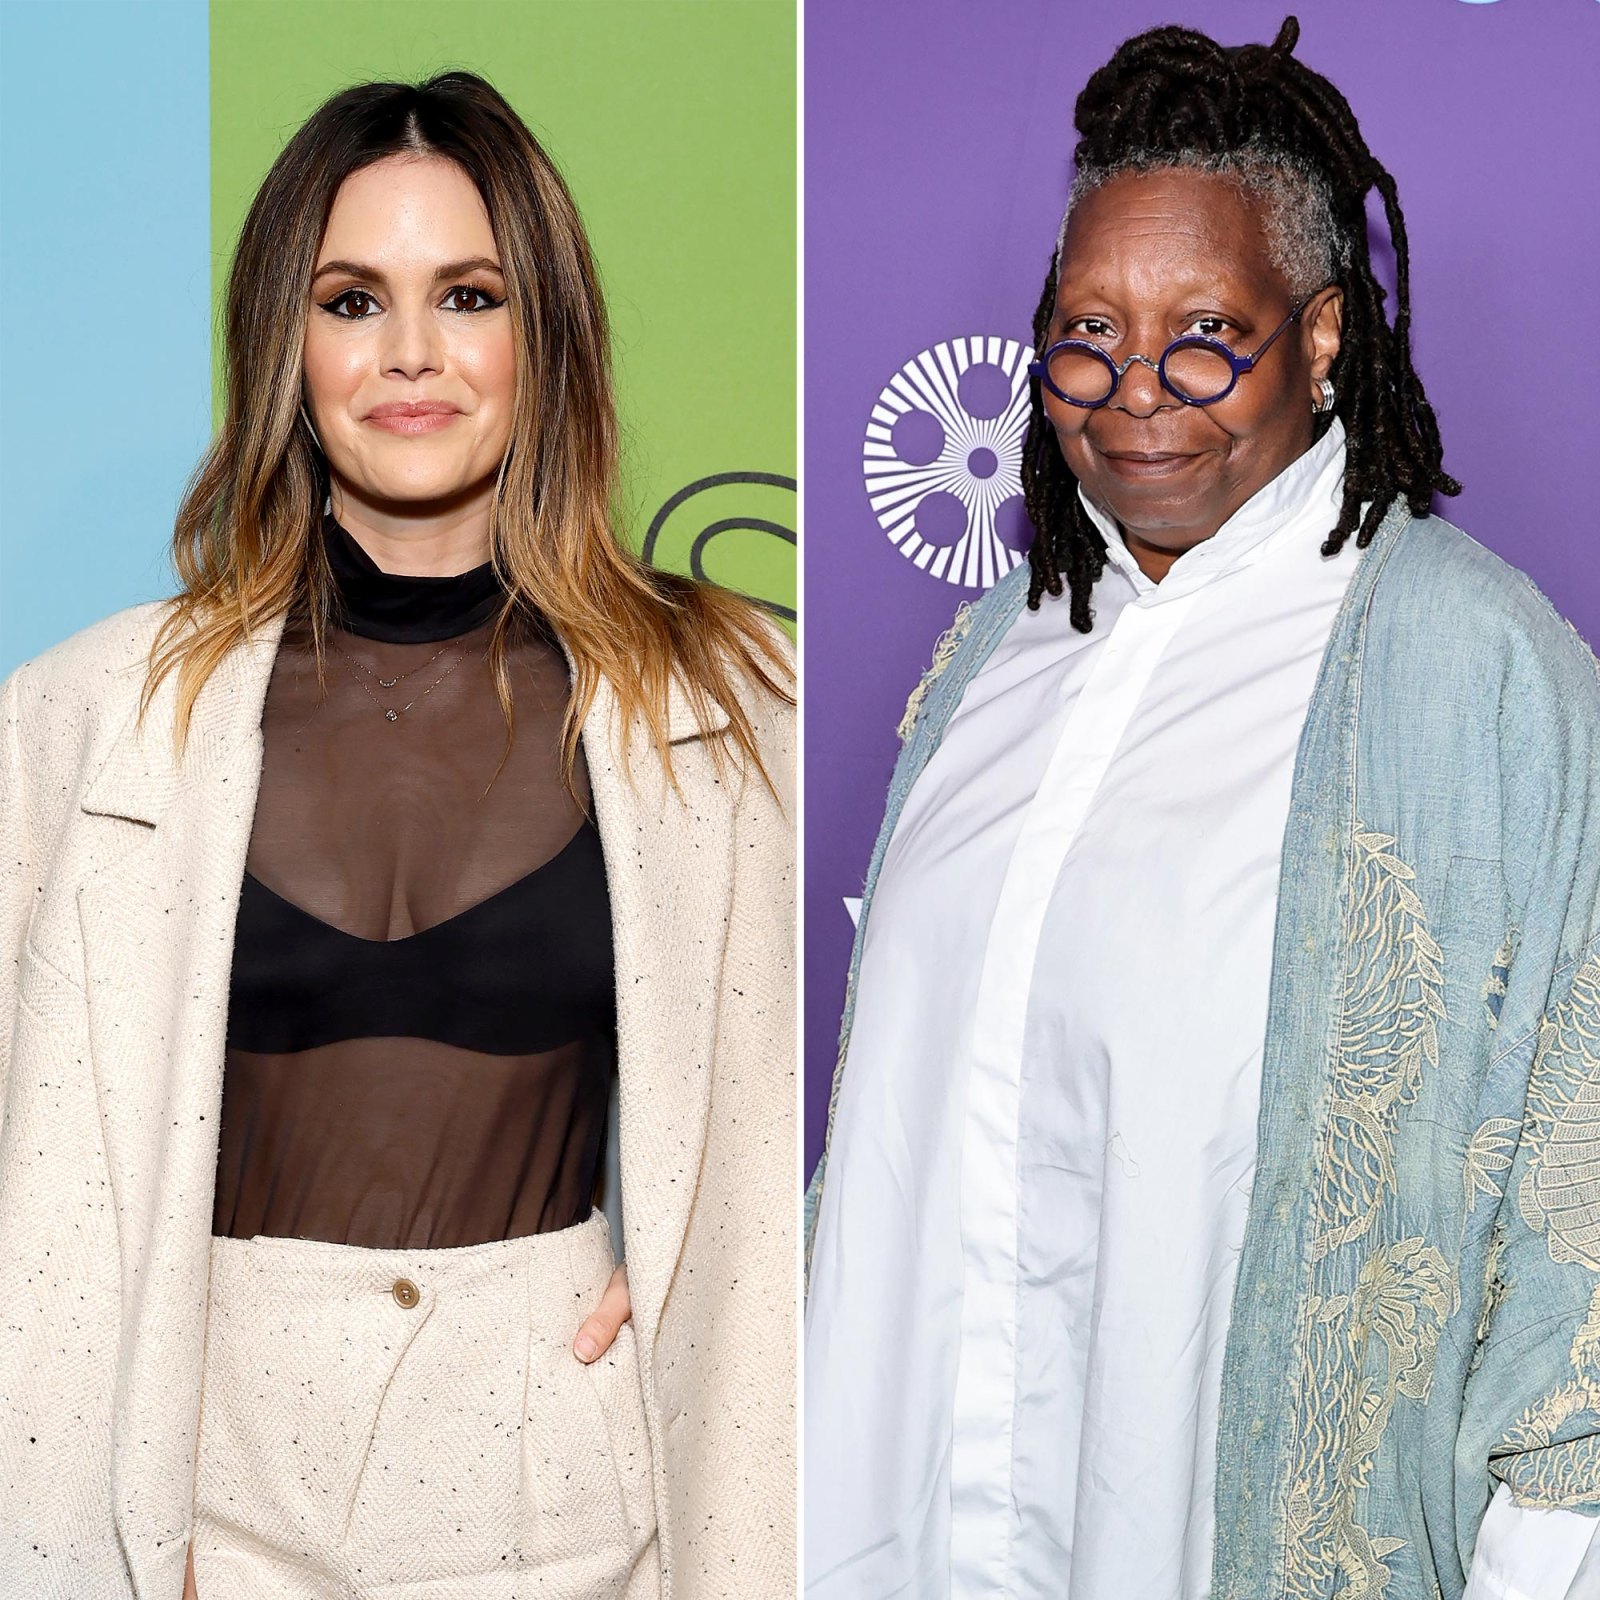 Rachel Bilson Owes Whoopi Goldberg A Present After Podcast Conflict 